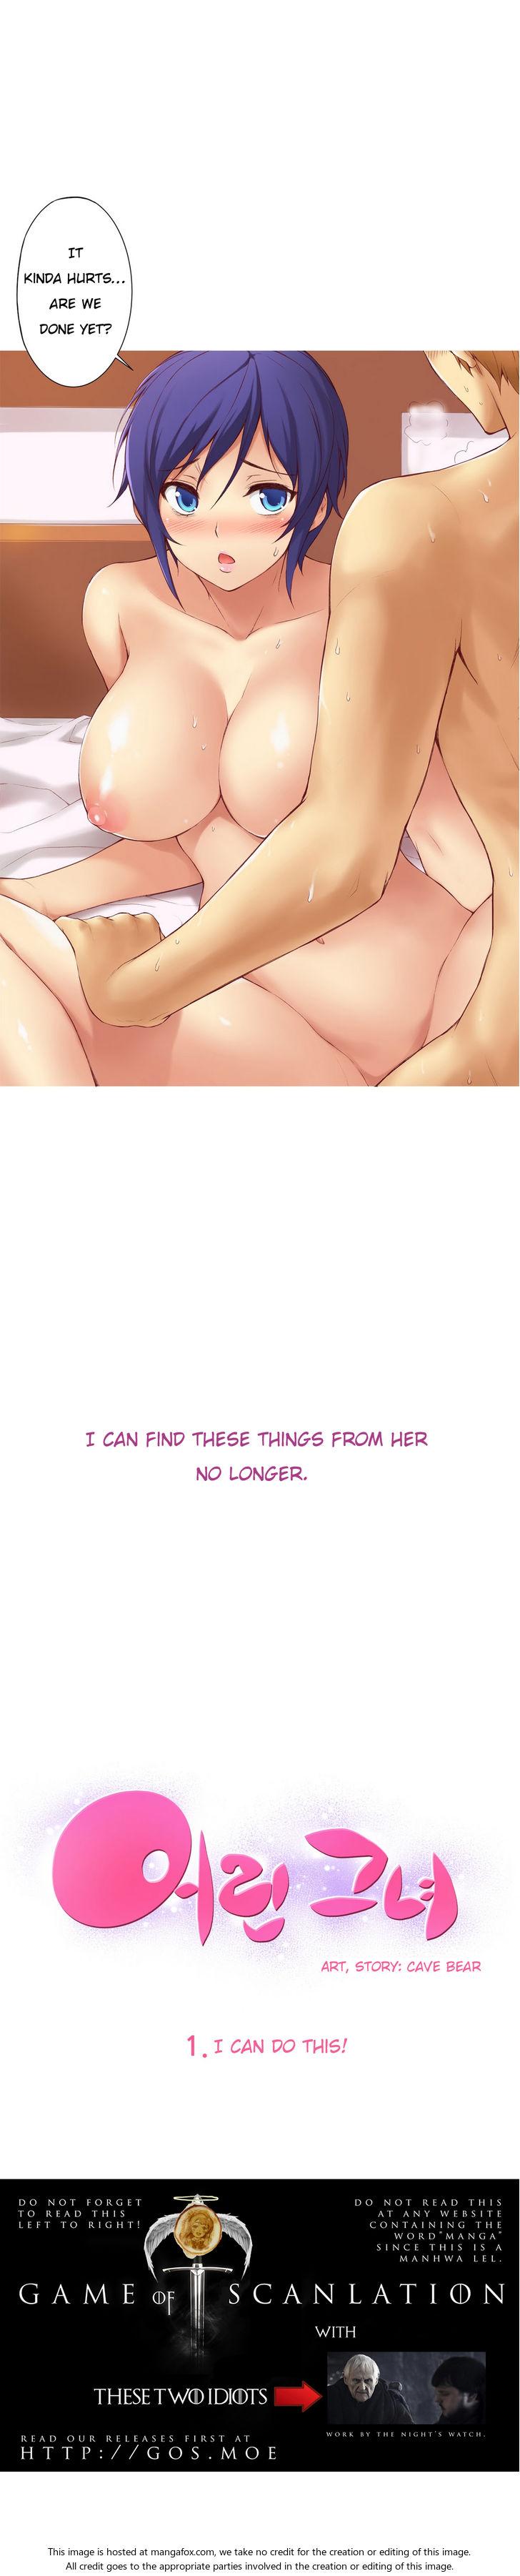 Amateur Xxx [Donggul Gom] She is Young (English) Part 1/2 Bed - Page 6